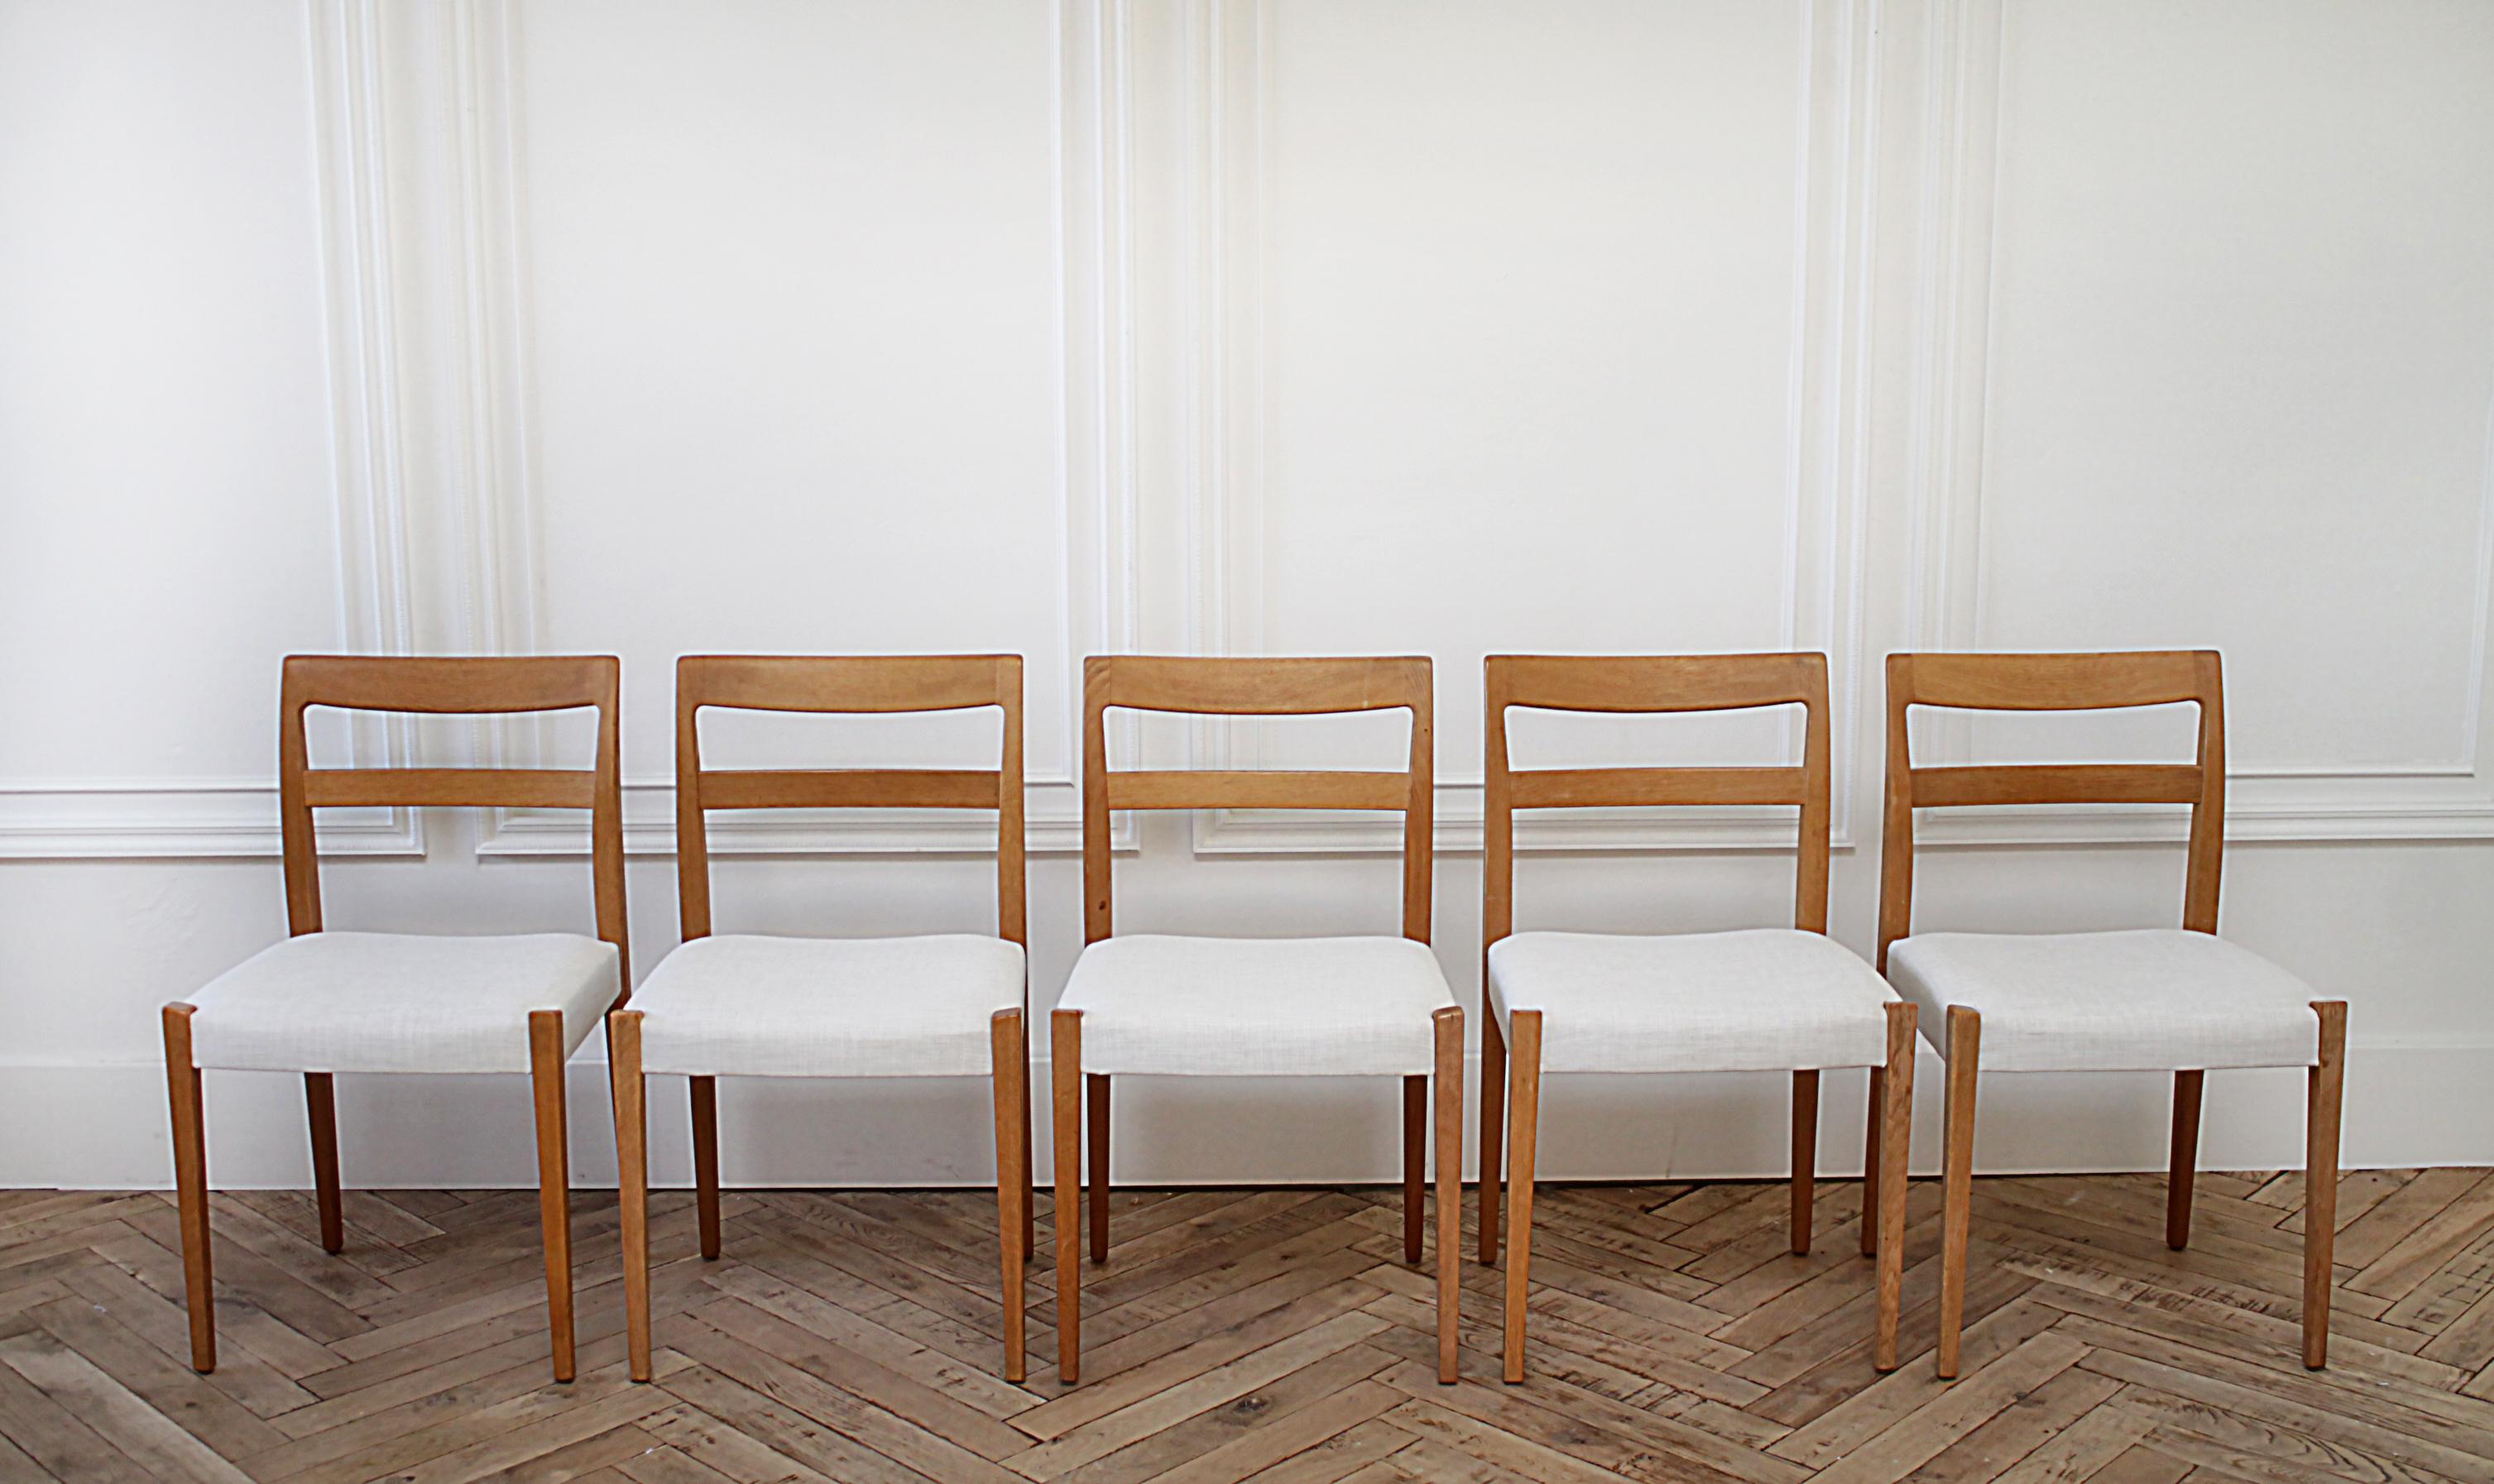 Vintage Swedish modern dining chairs by Troed Bjarnum. A medium colored walnut frame, with light natural colored upholstery. Set of 5, ready for everyday use.
Measures: 18.5